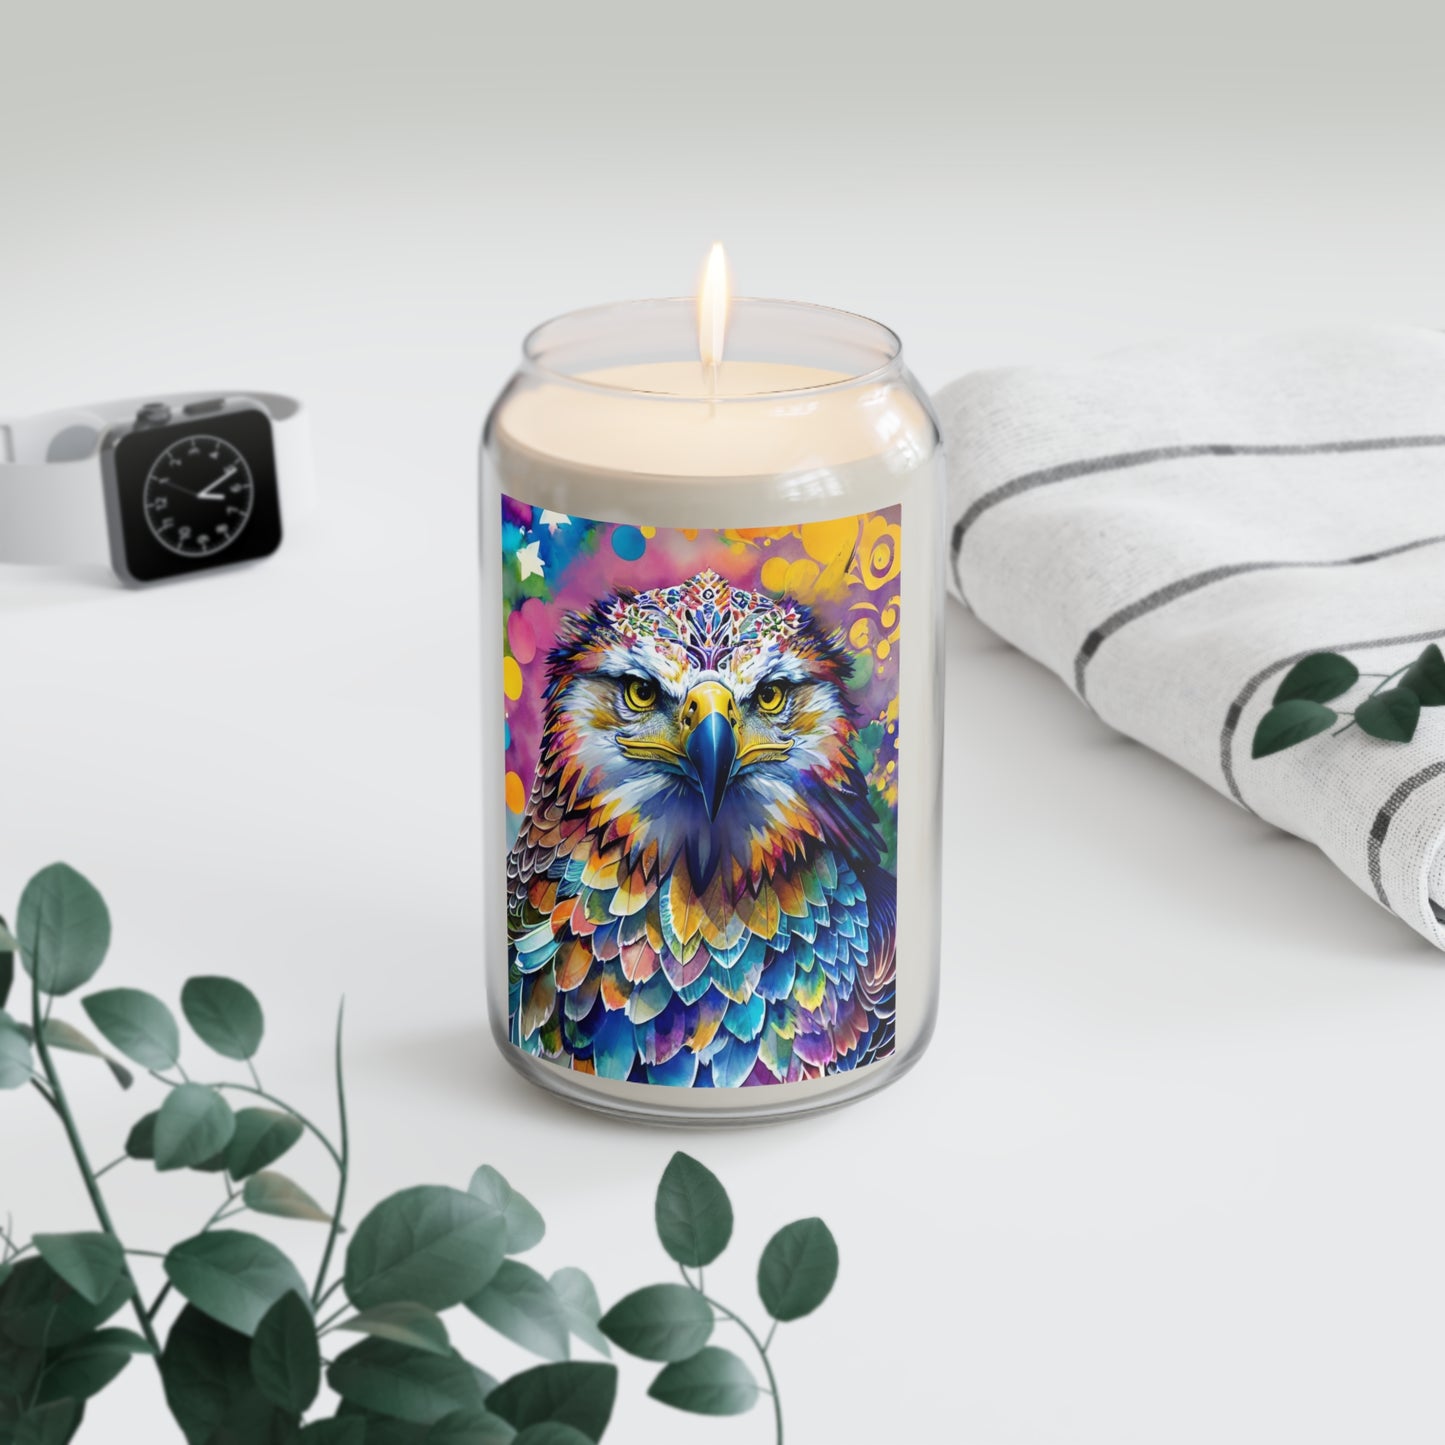 EAGLE Scented Candle, 13.75oz, Visionary Art